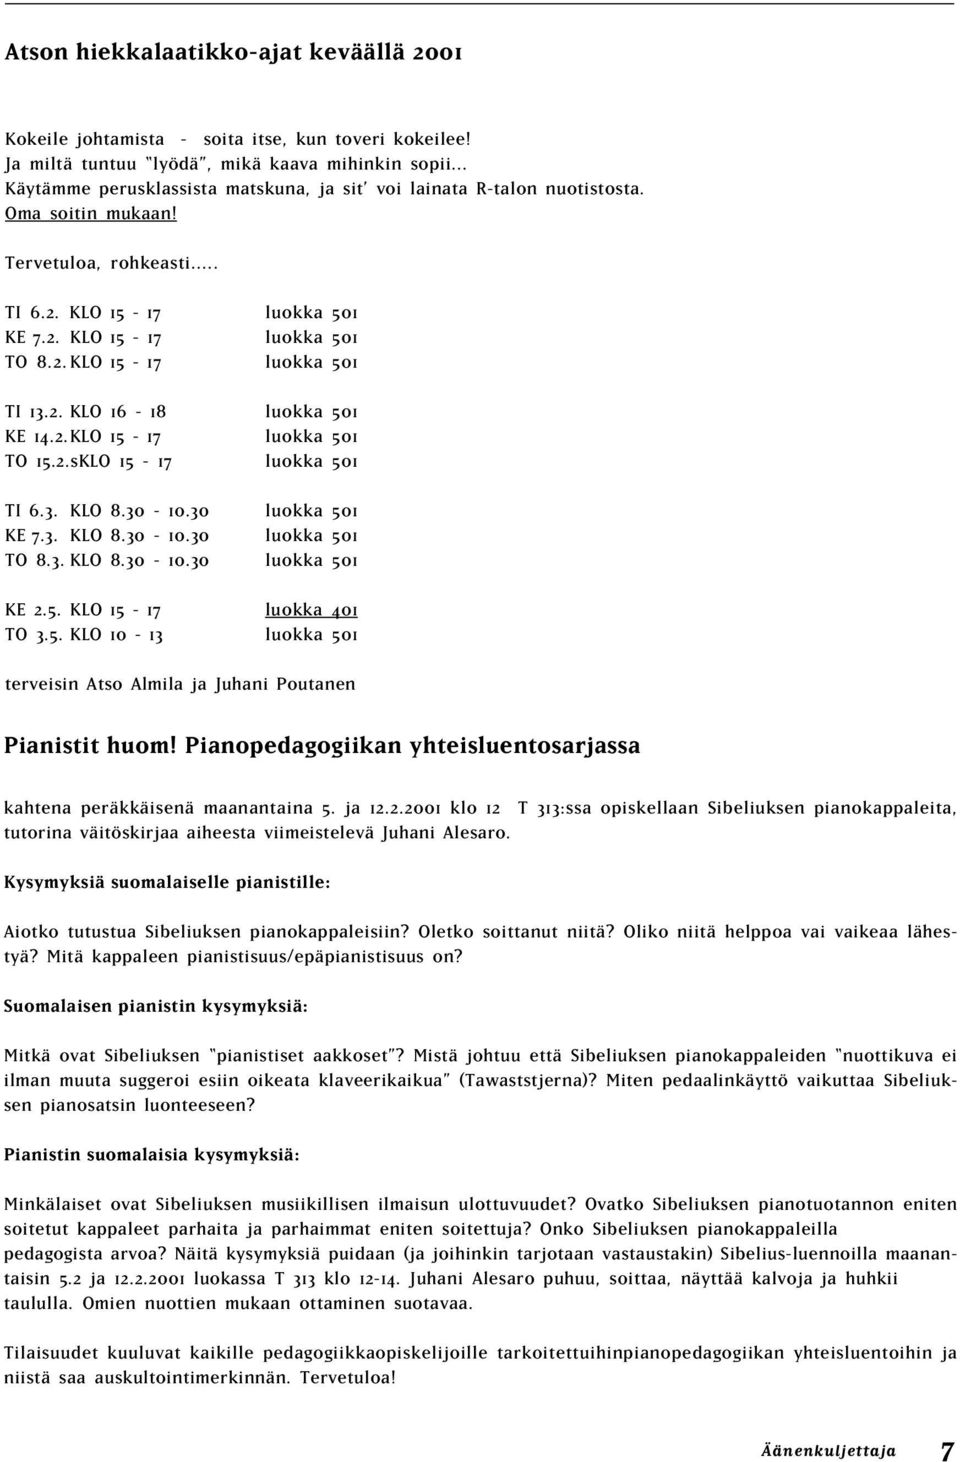 2. KLO 16-18 luokka 501 KE 14.2.KLO 15-17 luokka 501 TO 15.2.sKLO 15-17 luokka 501 TI 6.3. KLO 8.30-10.30 luokka 501 KE 7.3. KLO 8.30-10.30 luokka 501 TO 8.3. KLO 8.30-10.30 luokka 501 KE 2.5. KLO 15-17 luokka 401 TO 3.